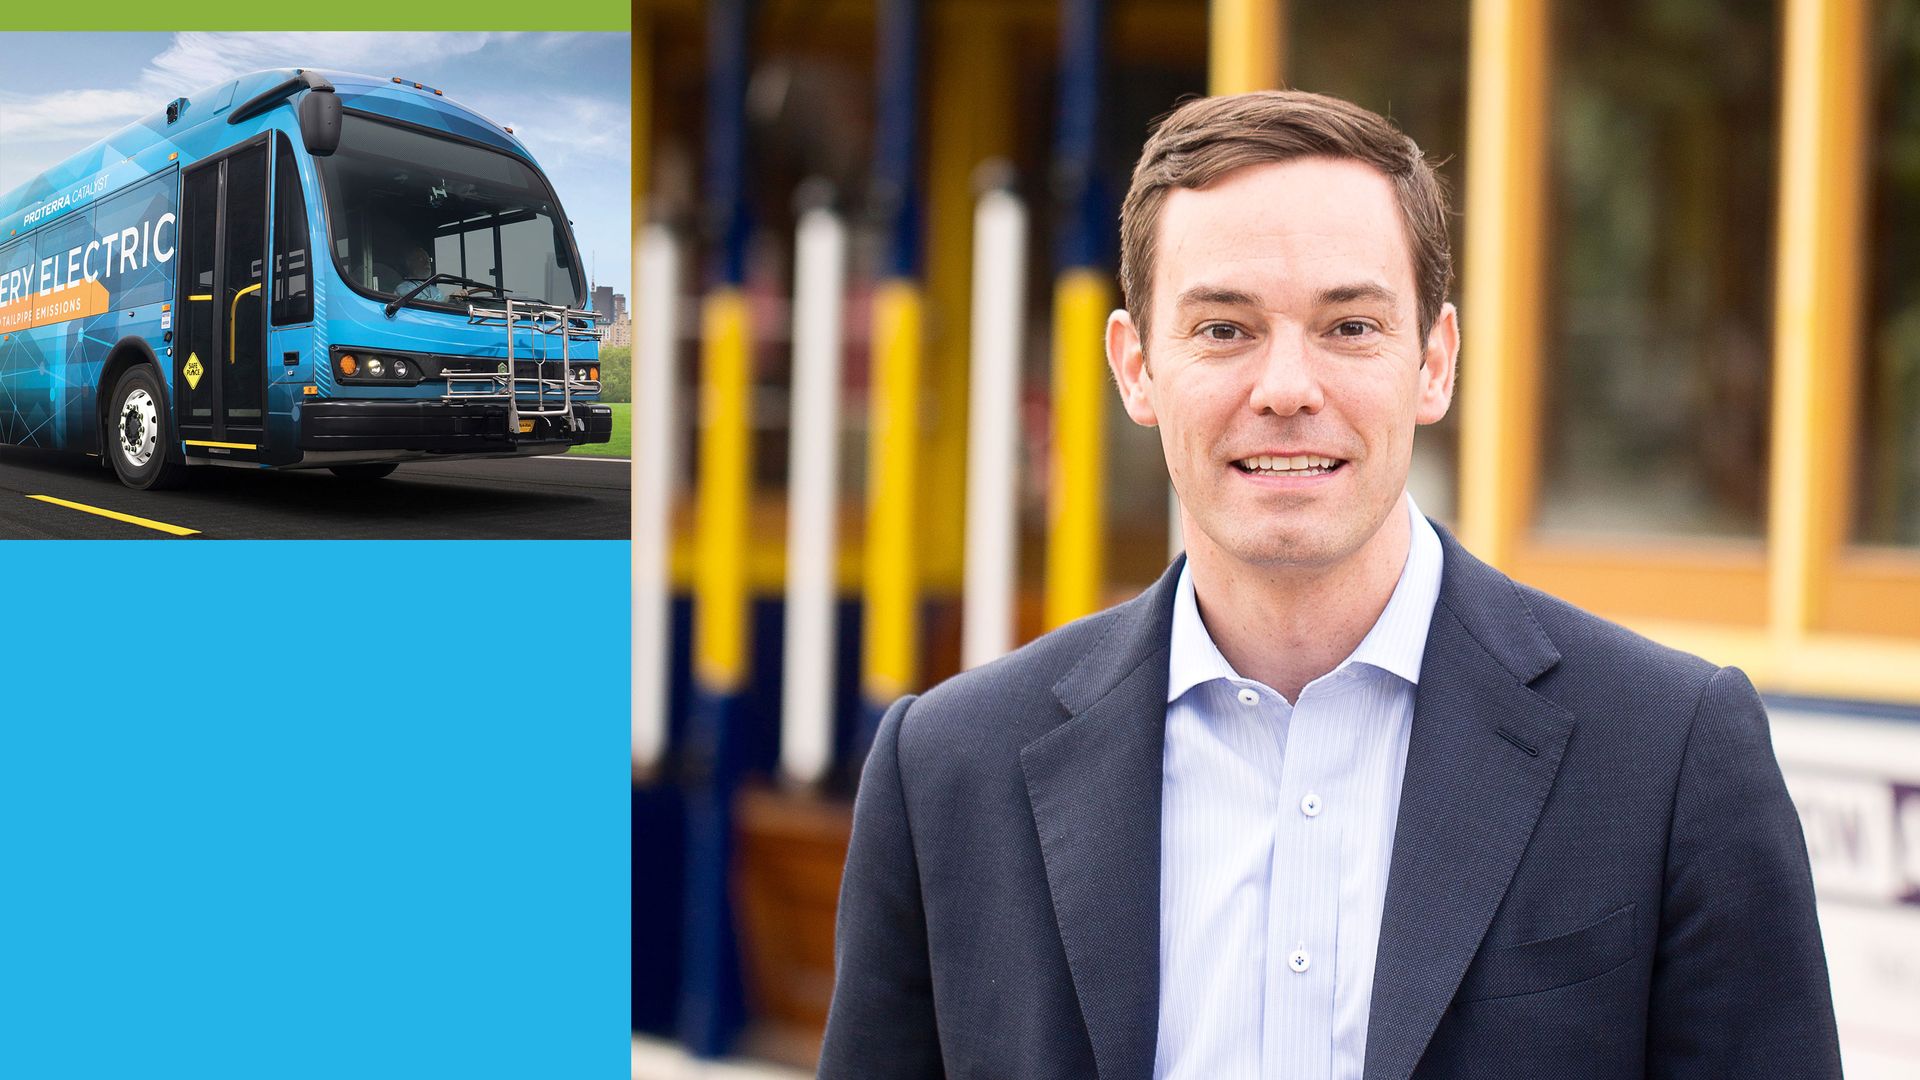 Photos of Proterra CEO Ryan Popple and an electric bus